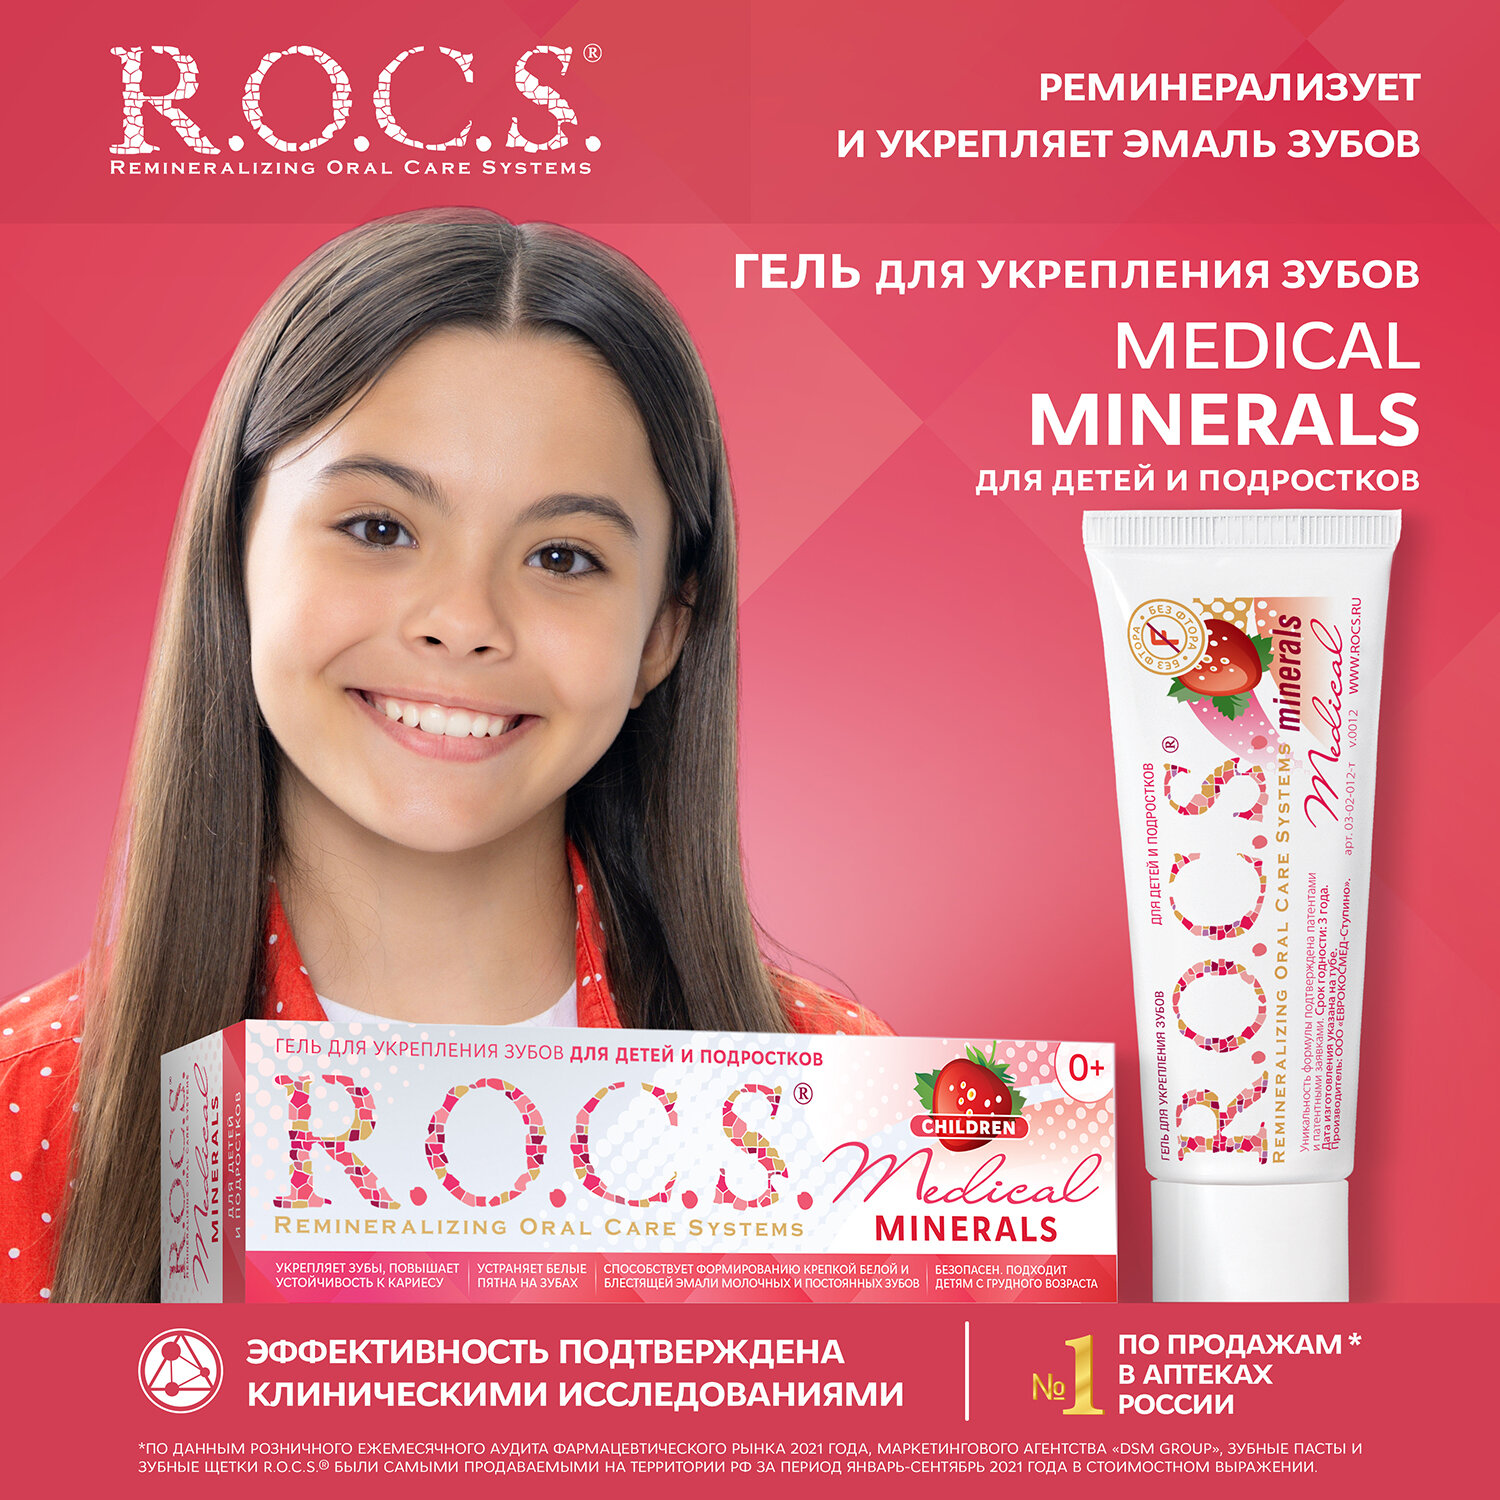     R.O.C.S. Medial Minerals,    ,   , 45 